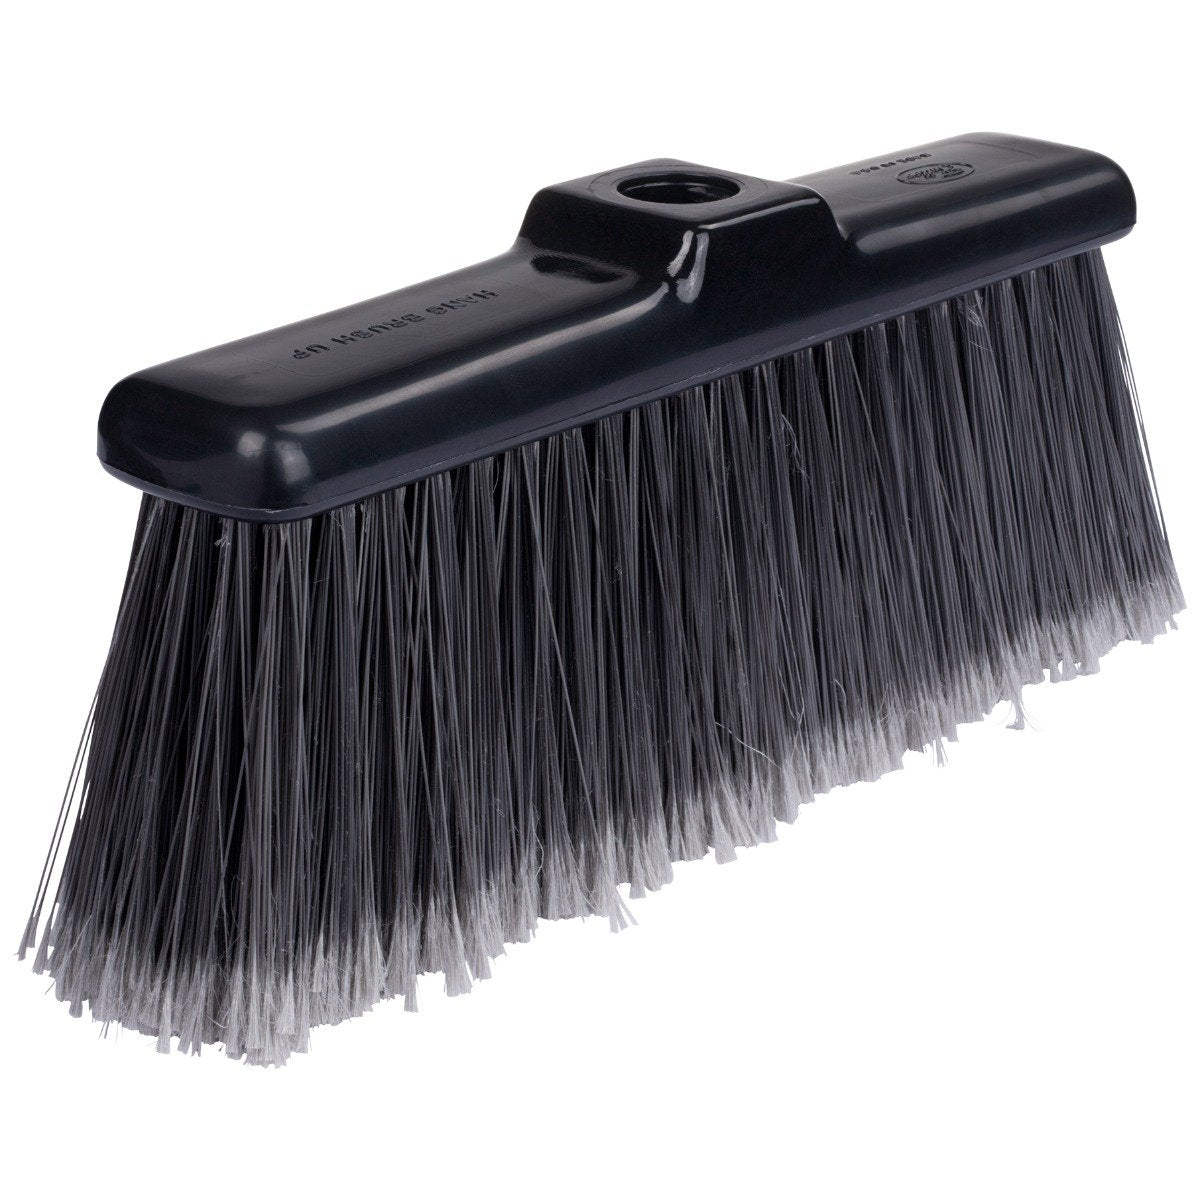 Shuro Brooms – The Best Cleaning Tool